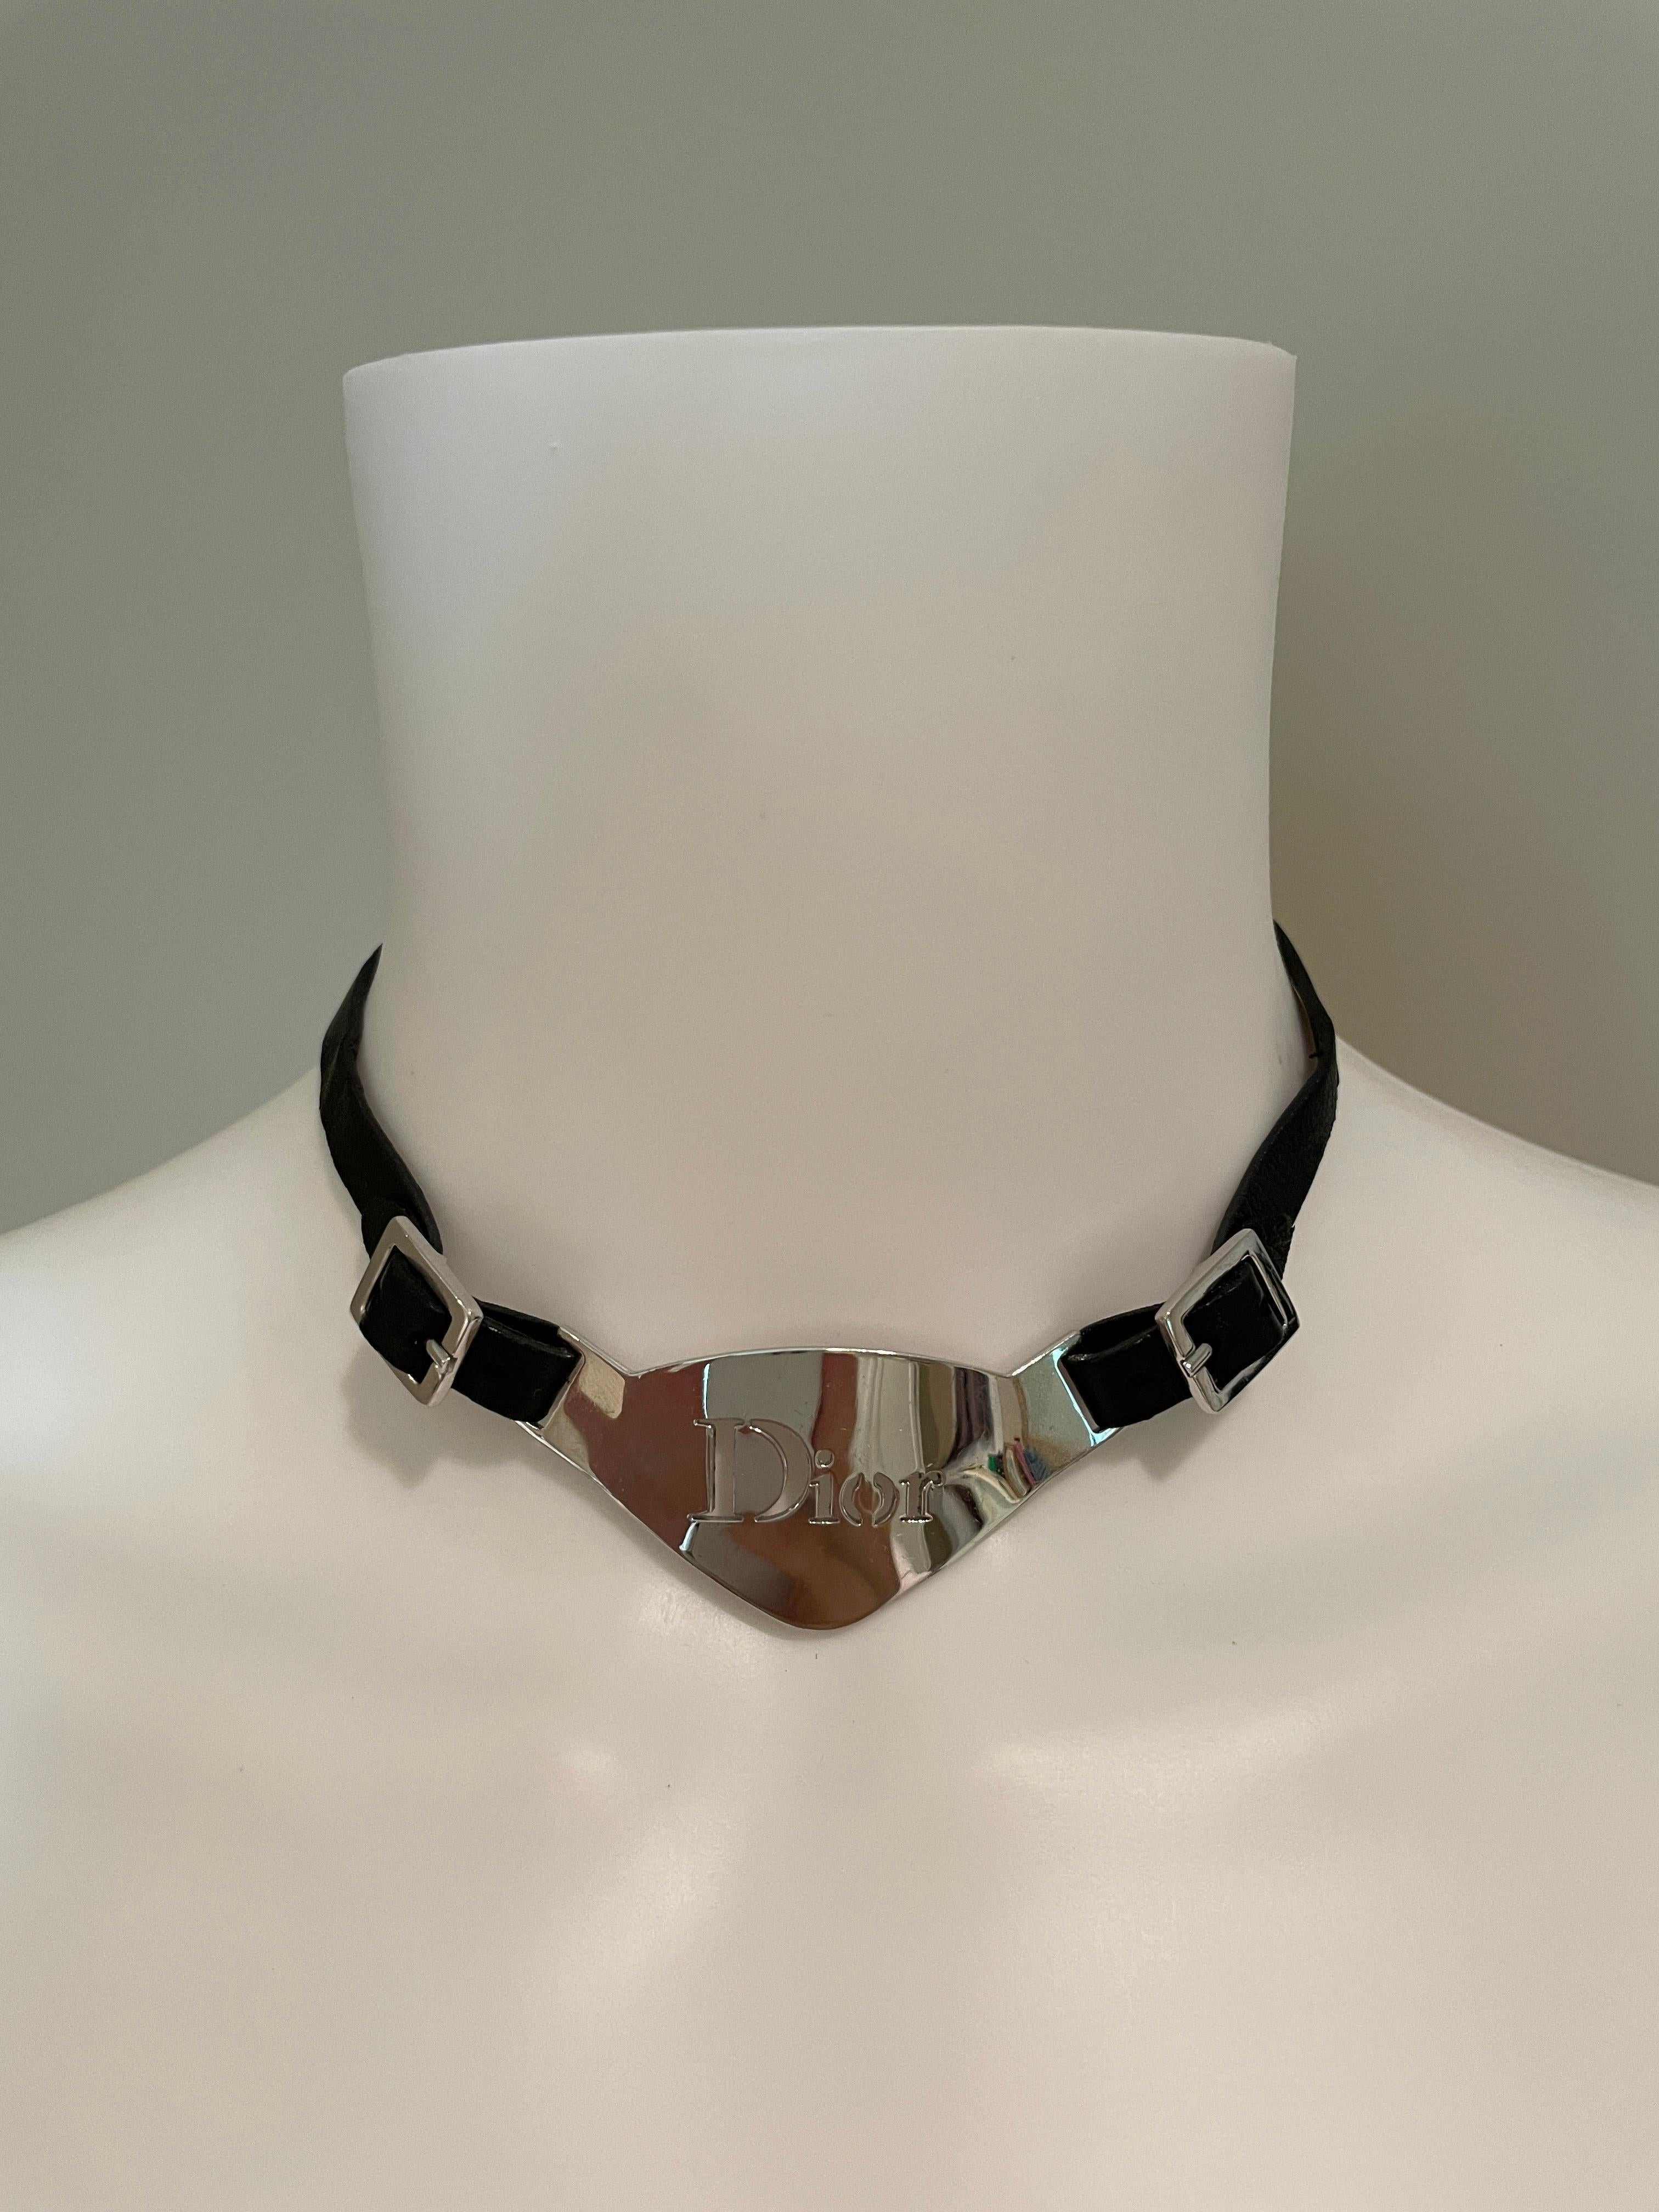 John Galliano for Christian Dior silver metal logo plate necklace. The black leather part of this choker is adjustable via the front 2 buckles, as well as extra links in the back. Good condition, consistent with wear. Scratches in the metal and the